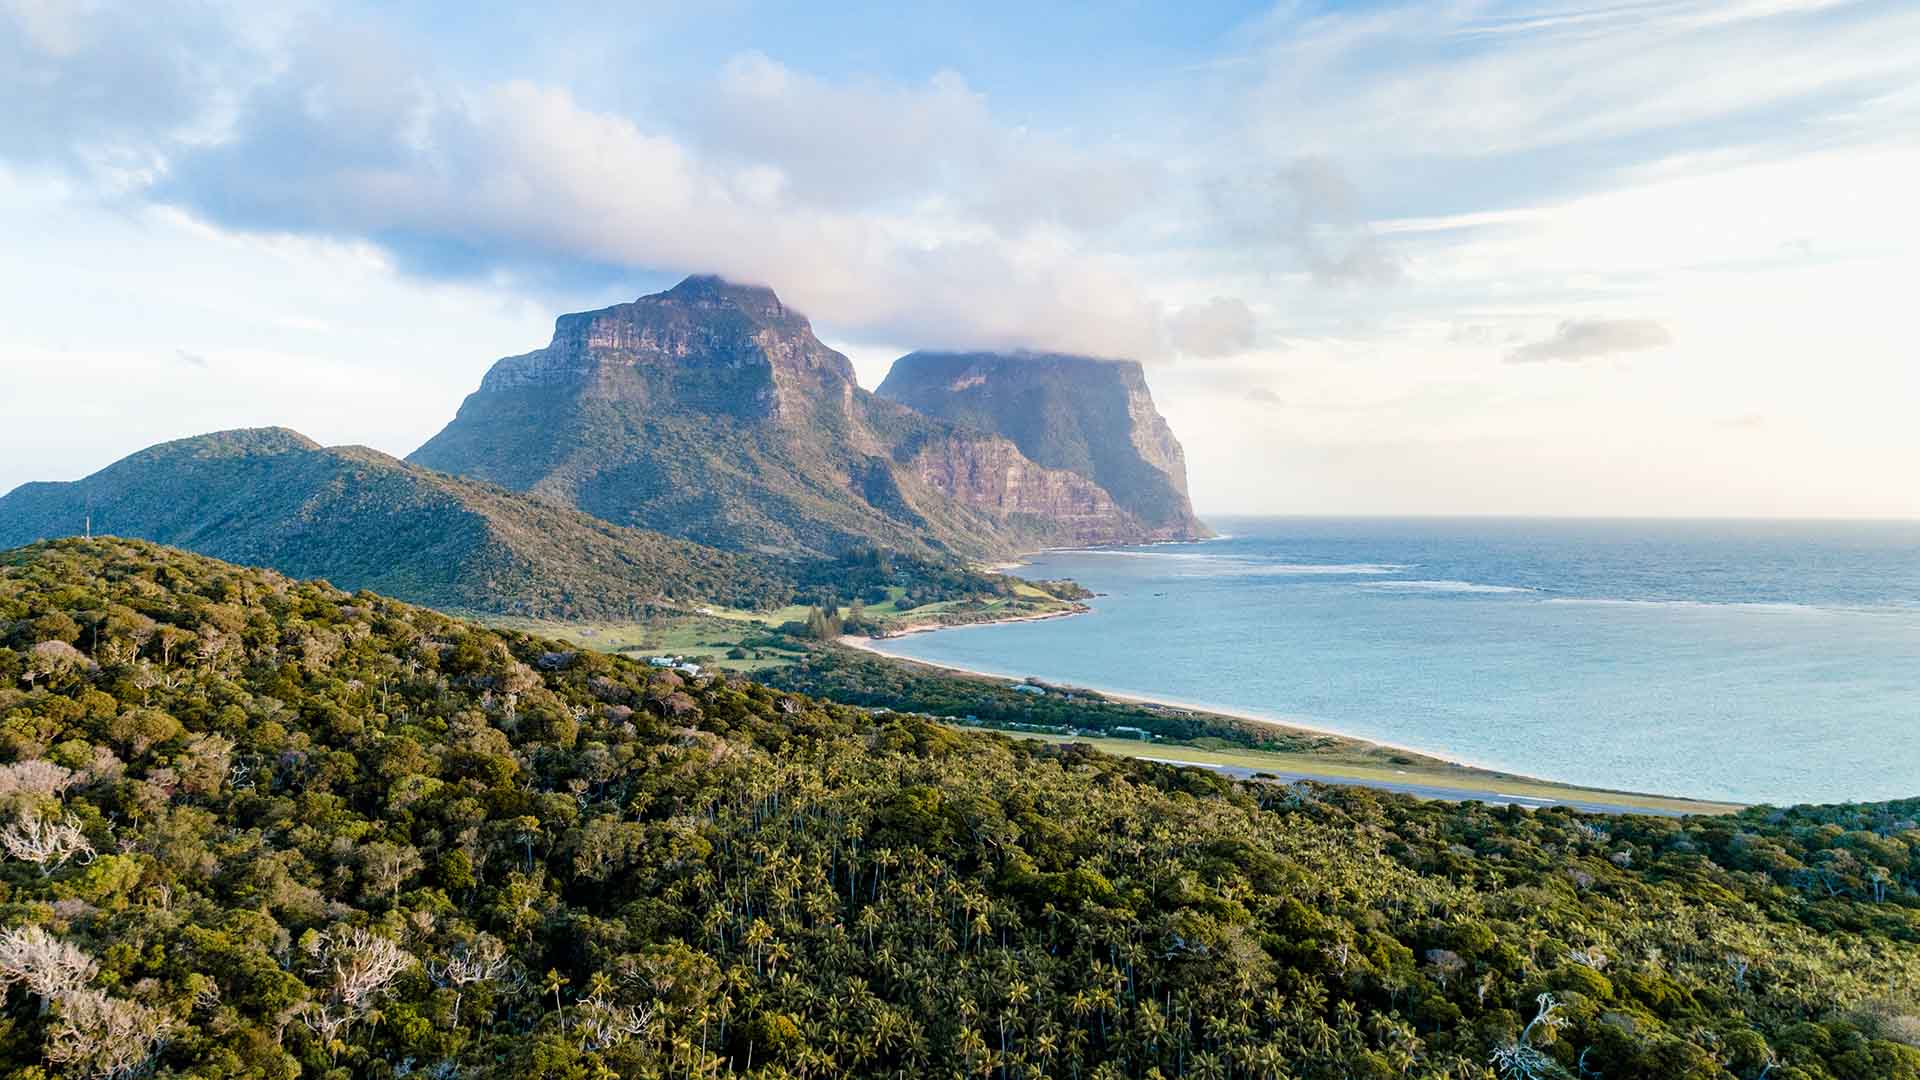 Lord Howe Island Has Been Named One of the Best Places to Visit in 2020 by Lonely Planet